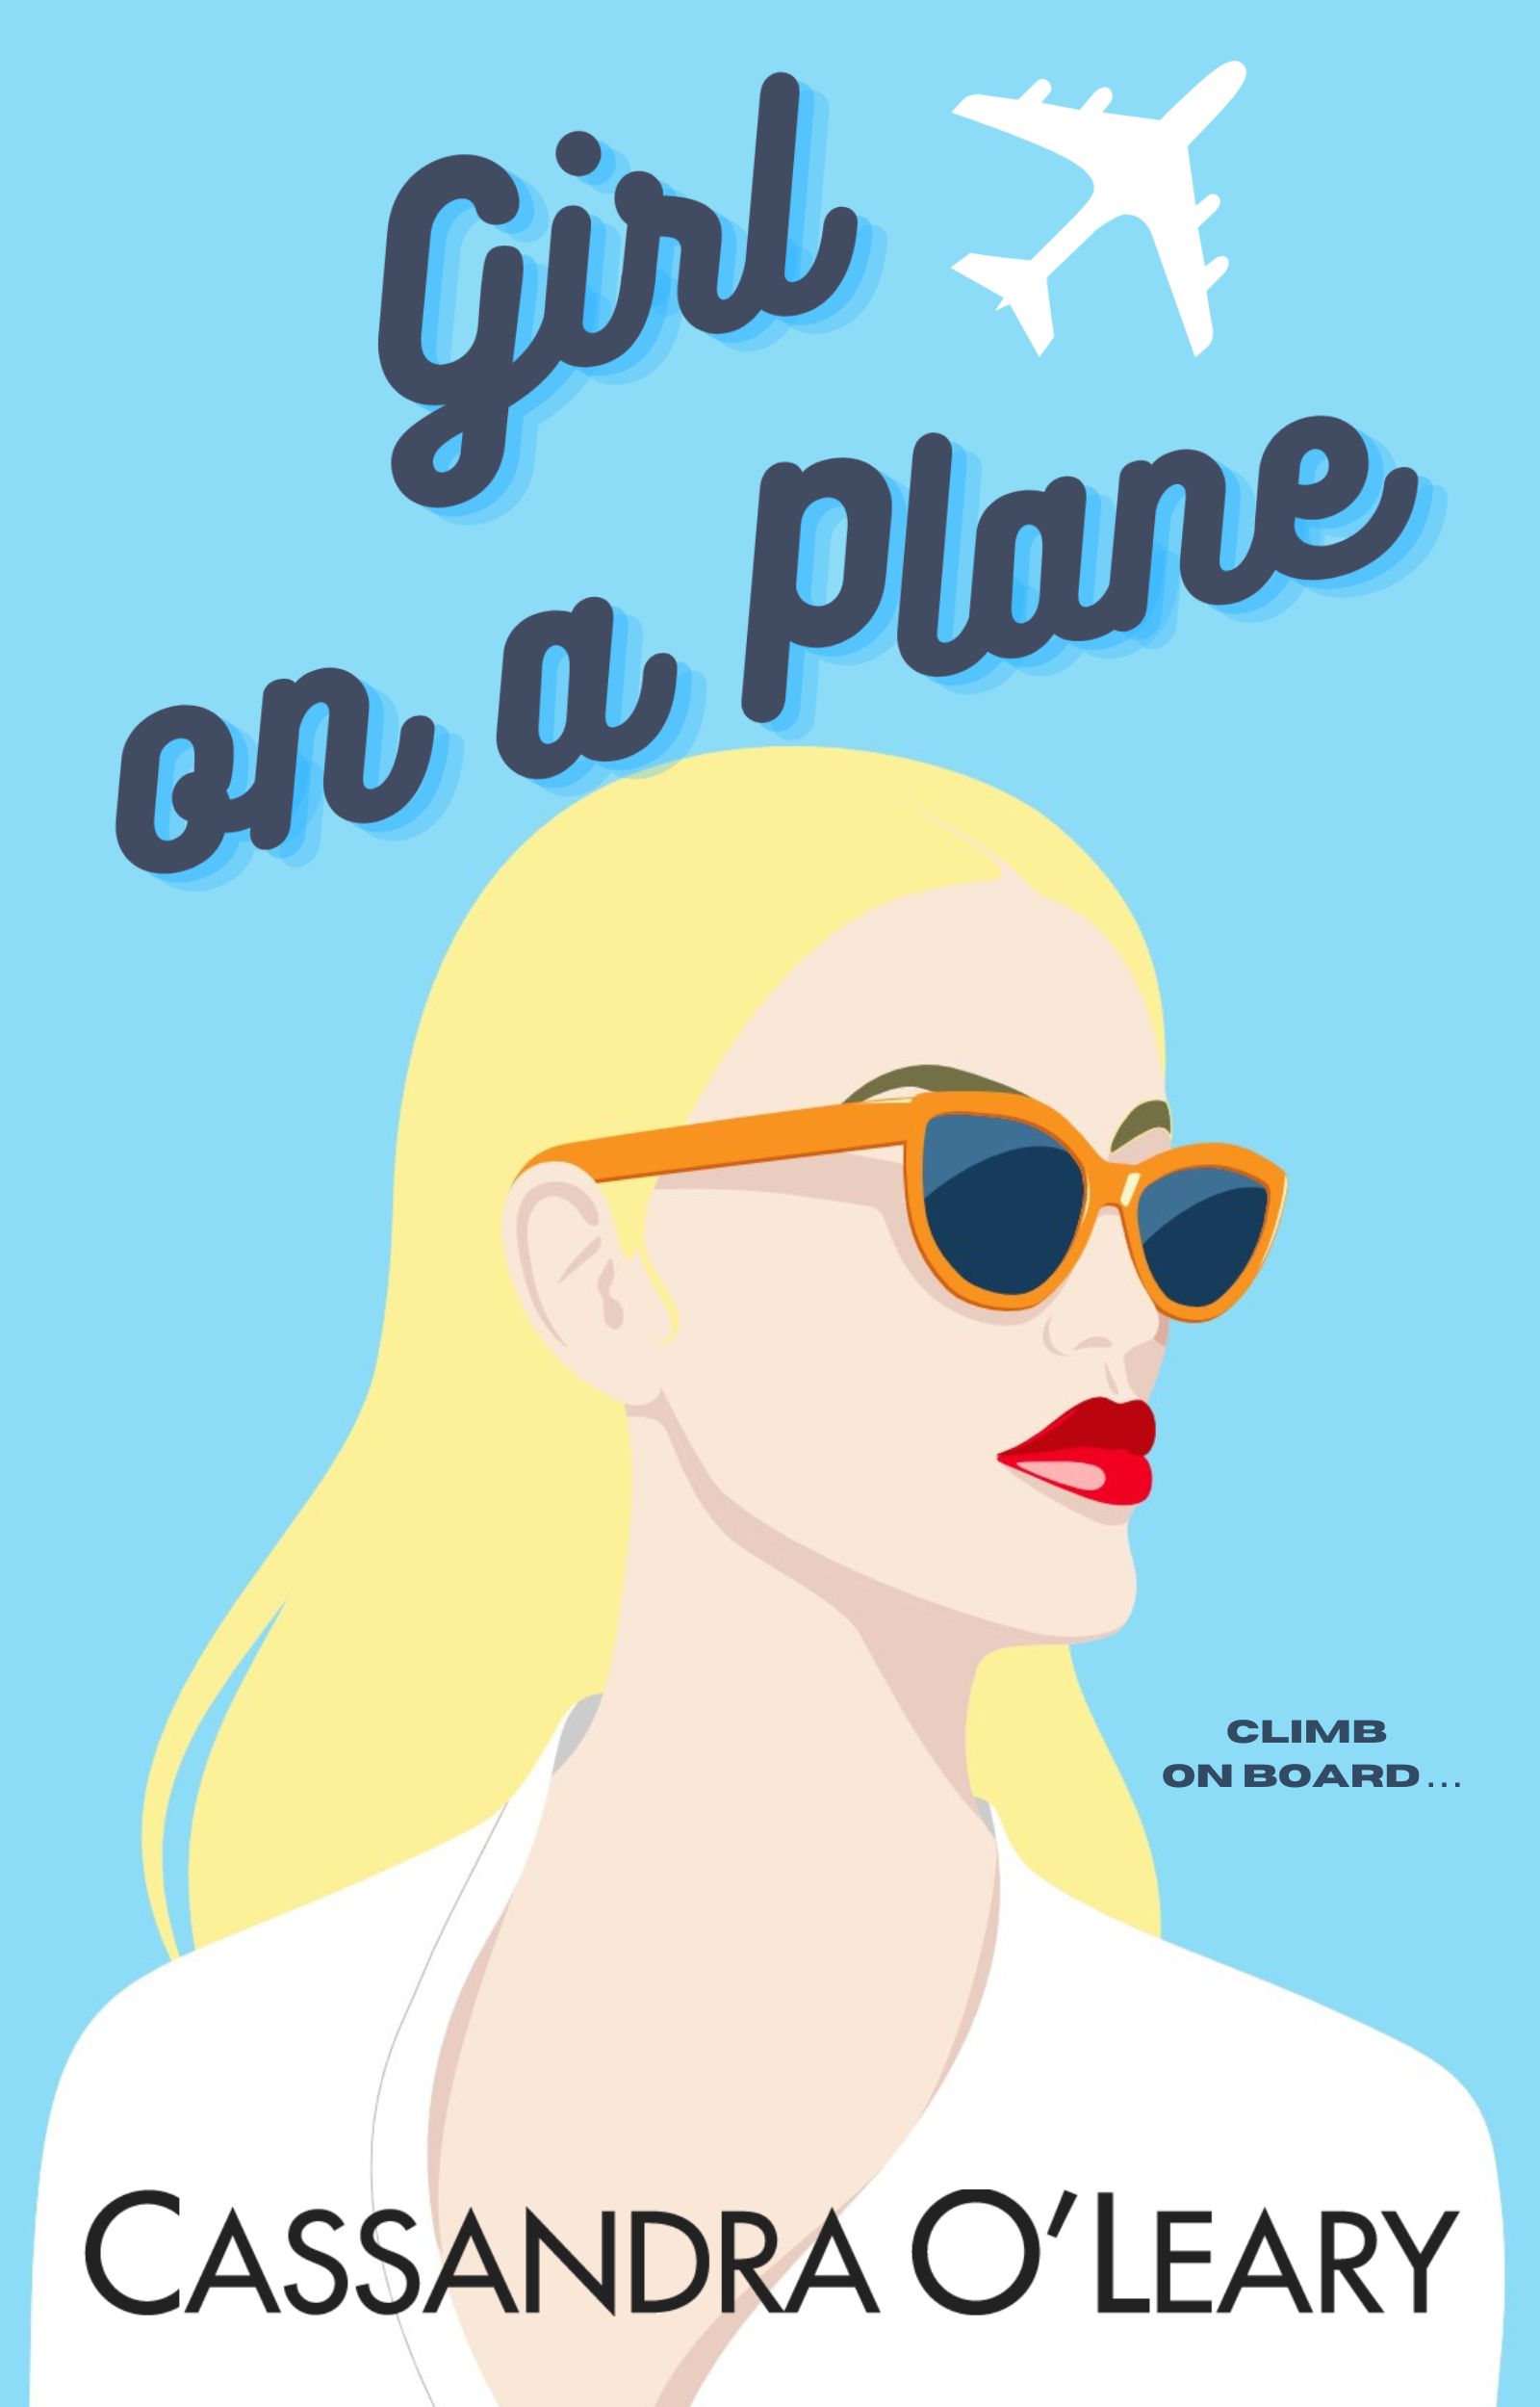 Girl on a Plane cover image